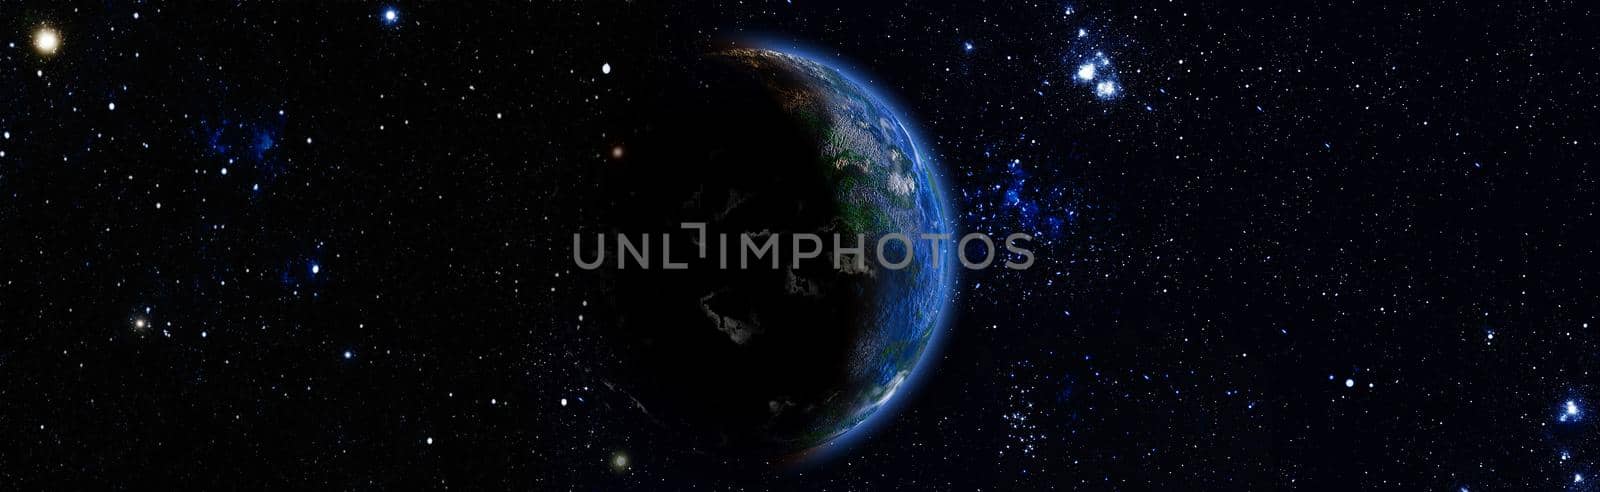 planets, stars and galaxies in outer space showing the beauty of space exploration. by Maximusnd